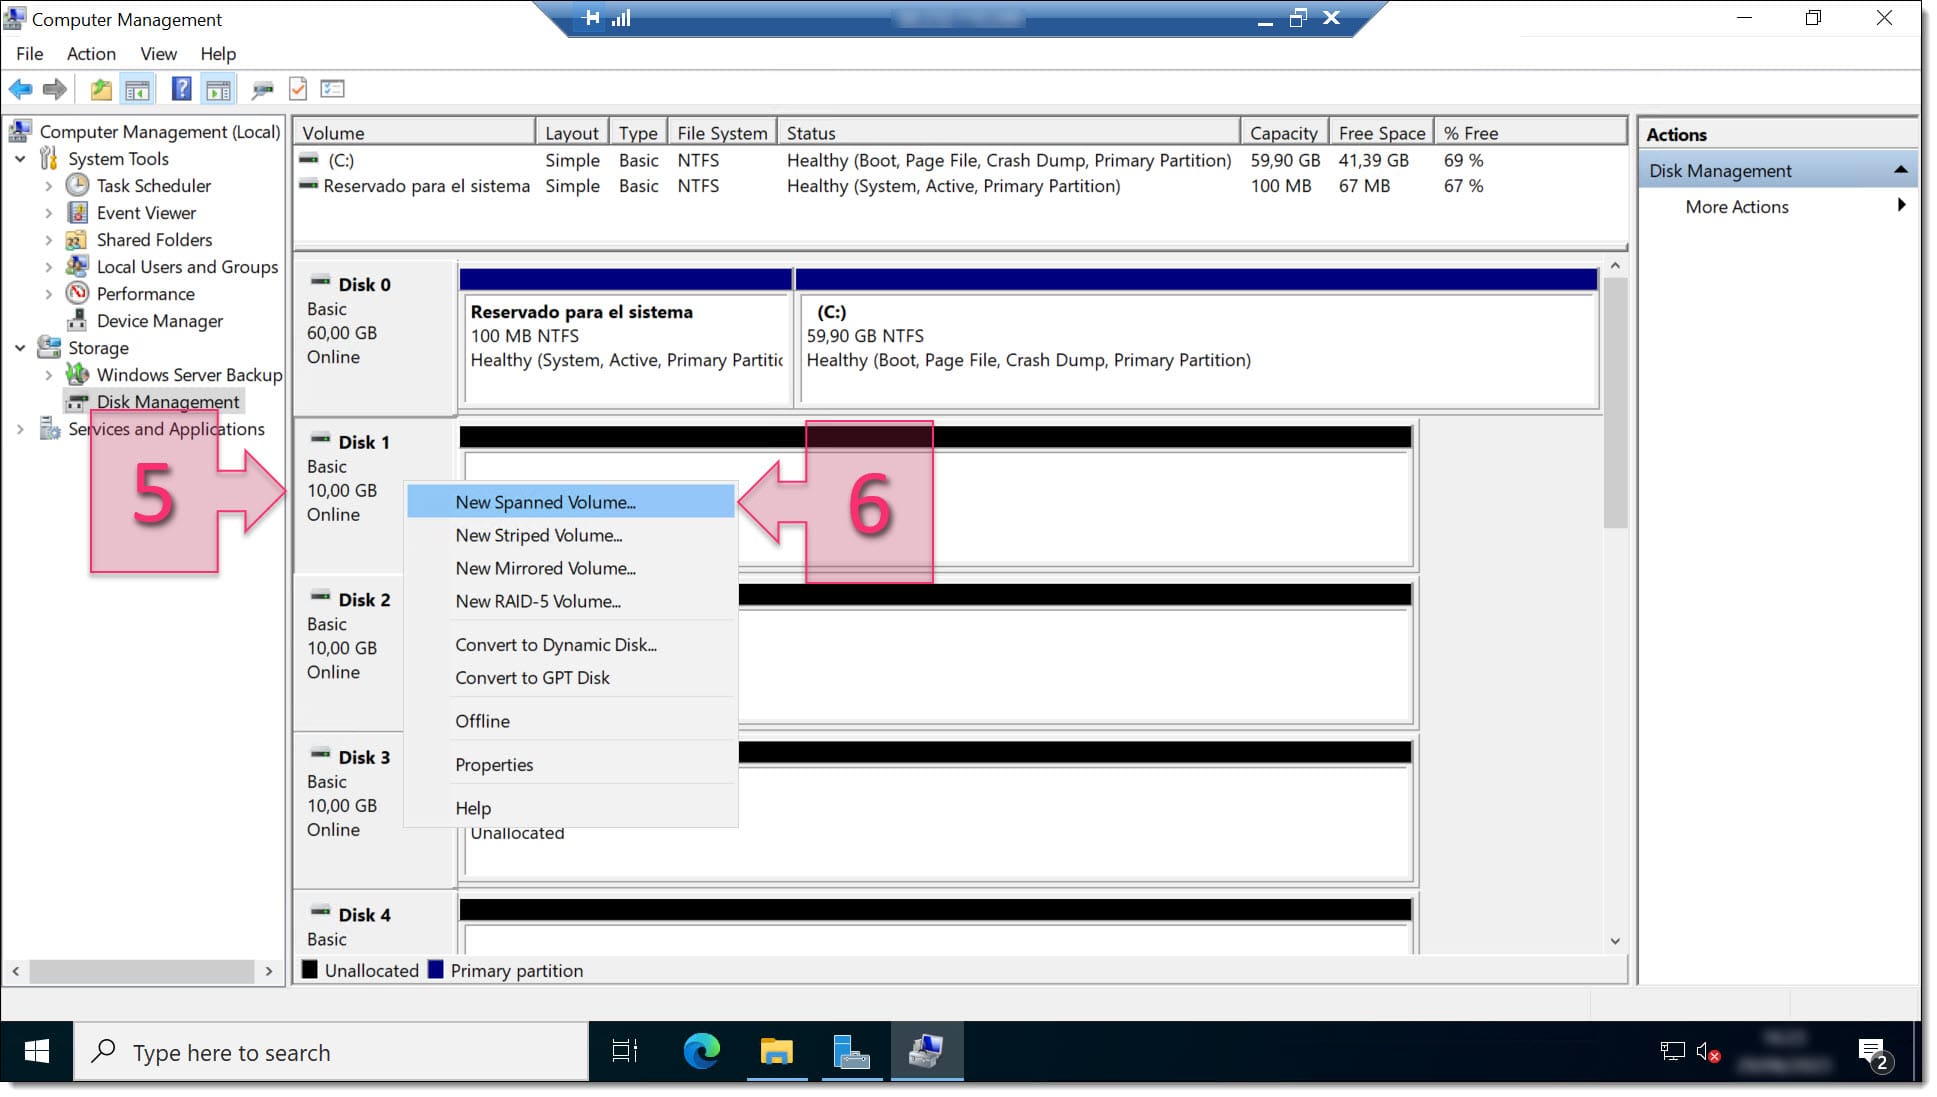 Screenshot of disk options available on Computer Management console